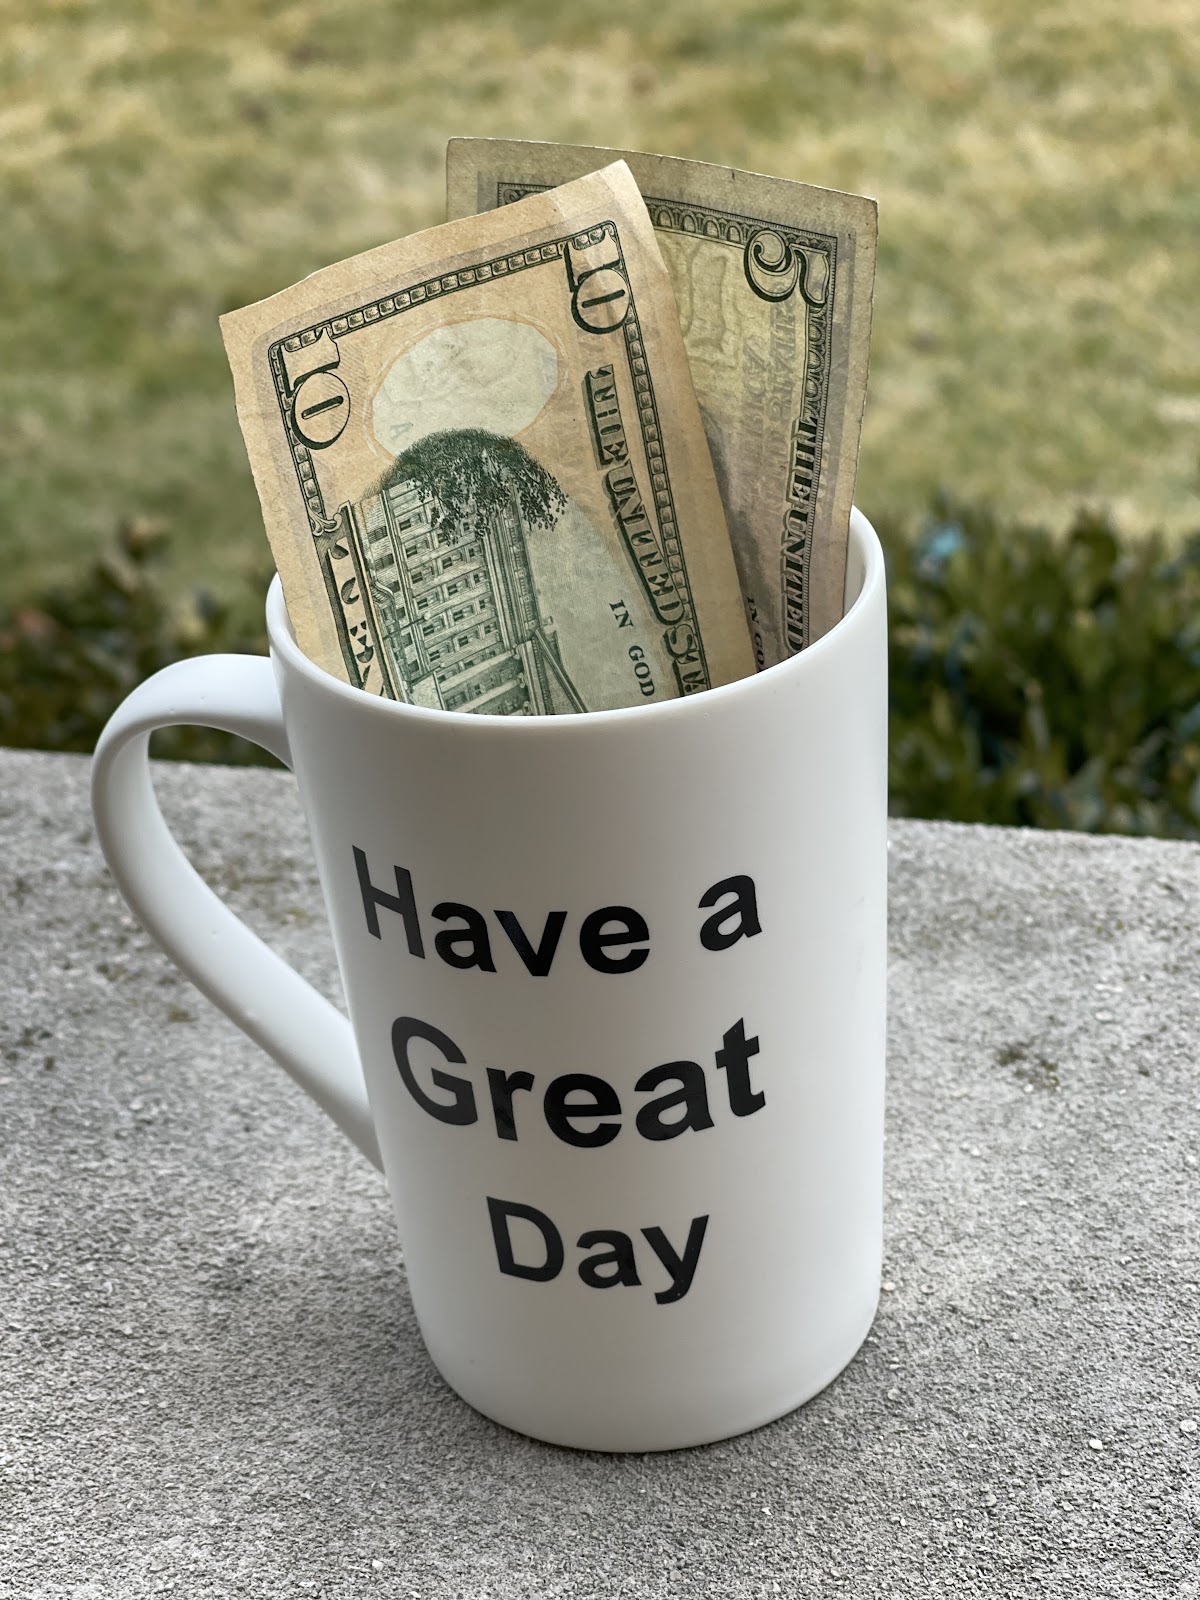 money in a coffee mug that says 'have a great day' as a gift for stay at home mom 